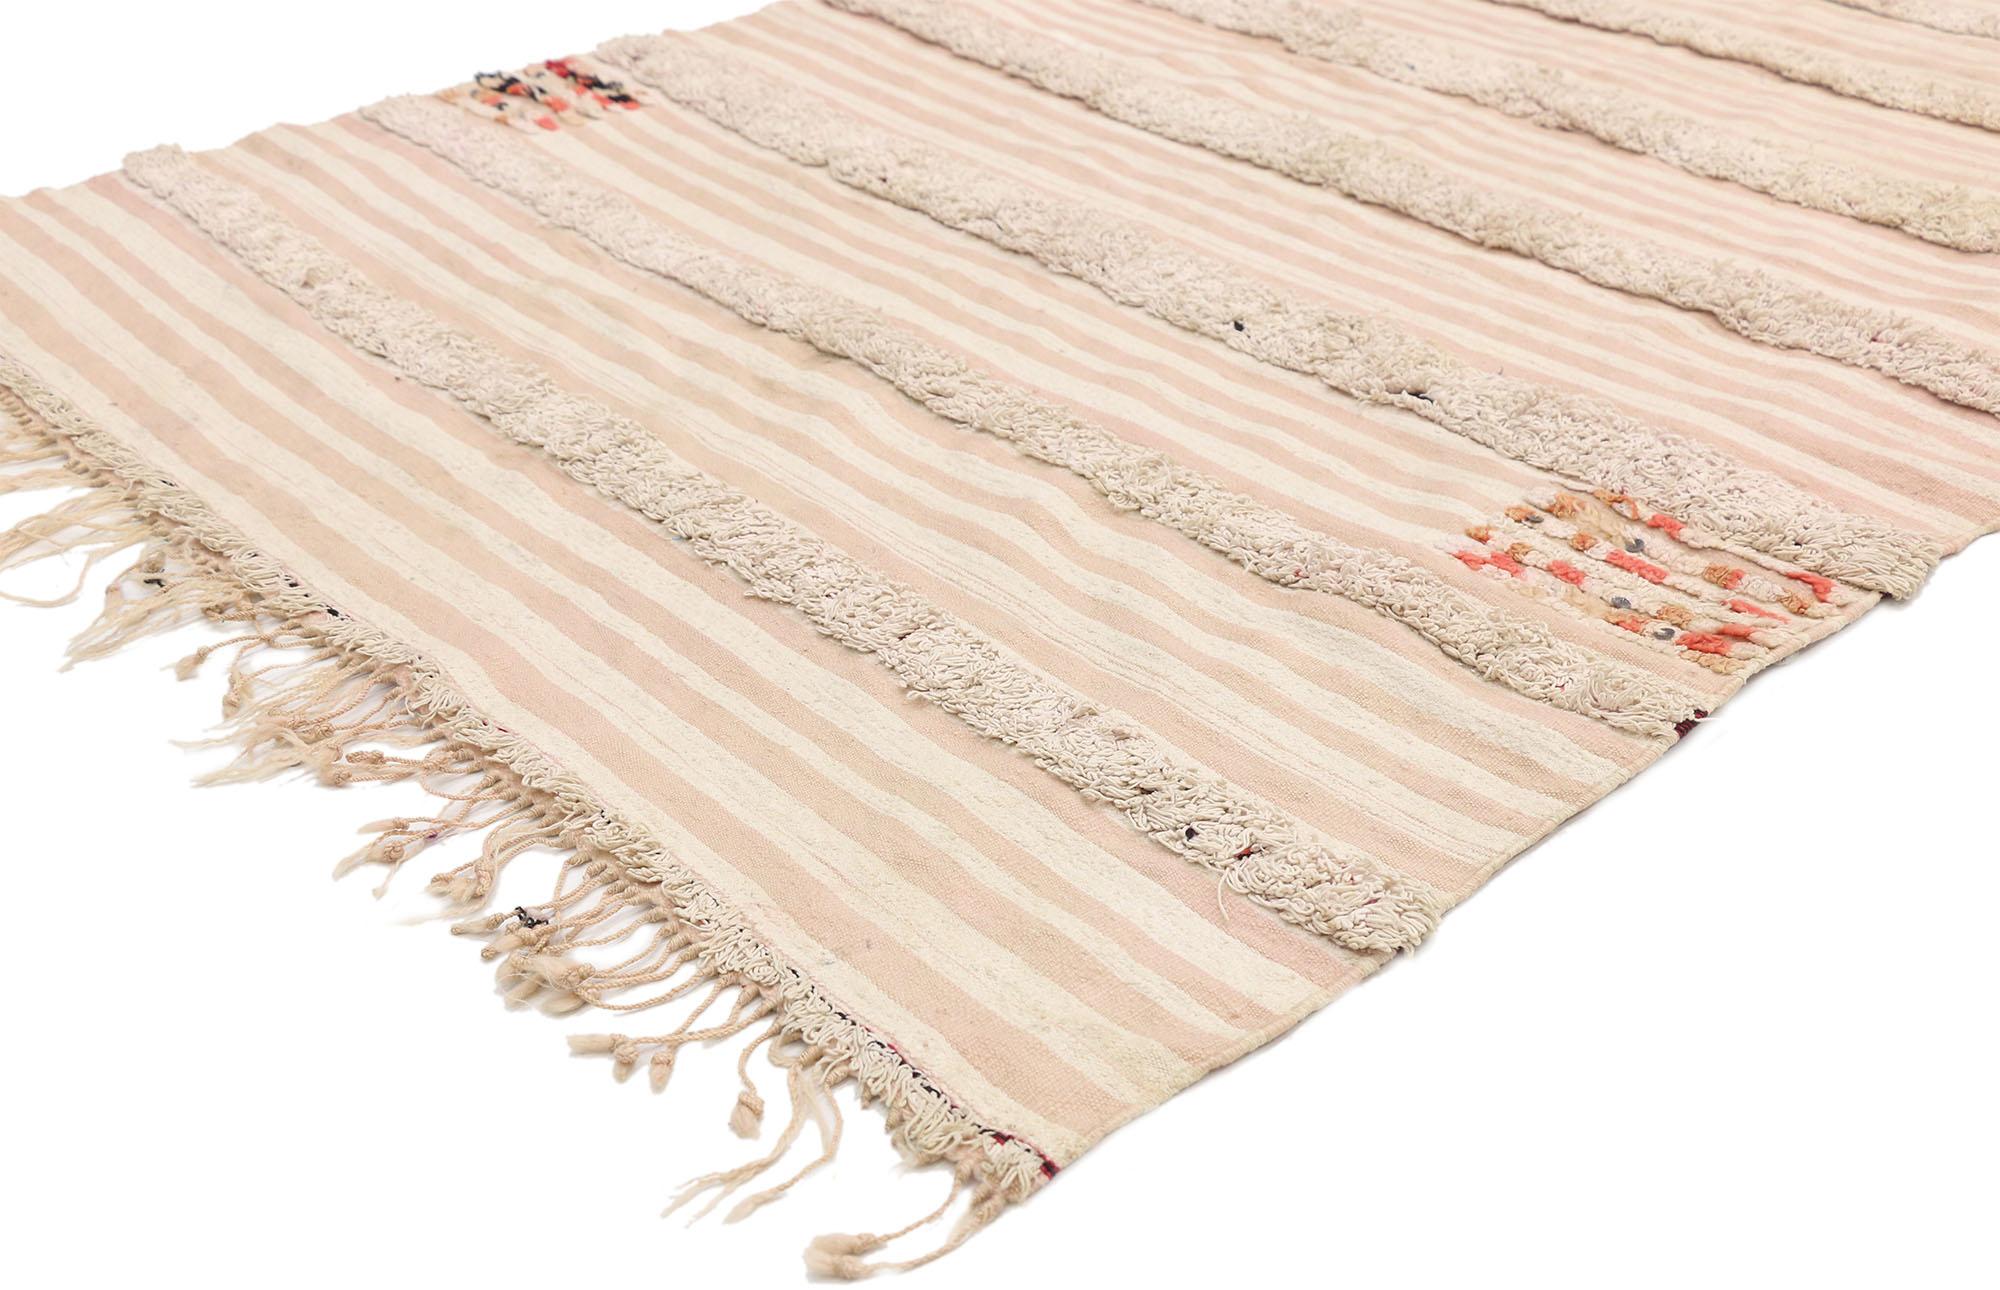 20822 Vintage Moroccan wedding blanket, Berber Handira Tamizart. This handwoven wool vintage Moroccan wedding blanket also known as a Berber Handira features rows of fluffy fringe embellished with accent colors and a hint of paillette sequins. The